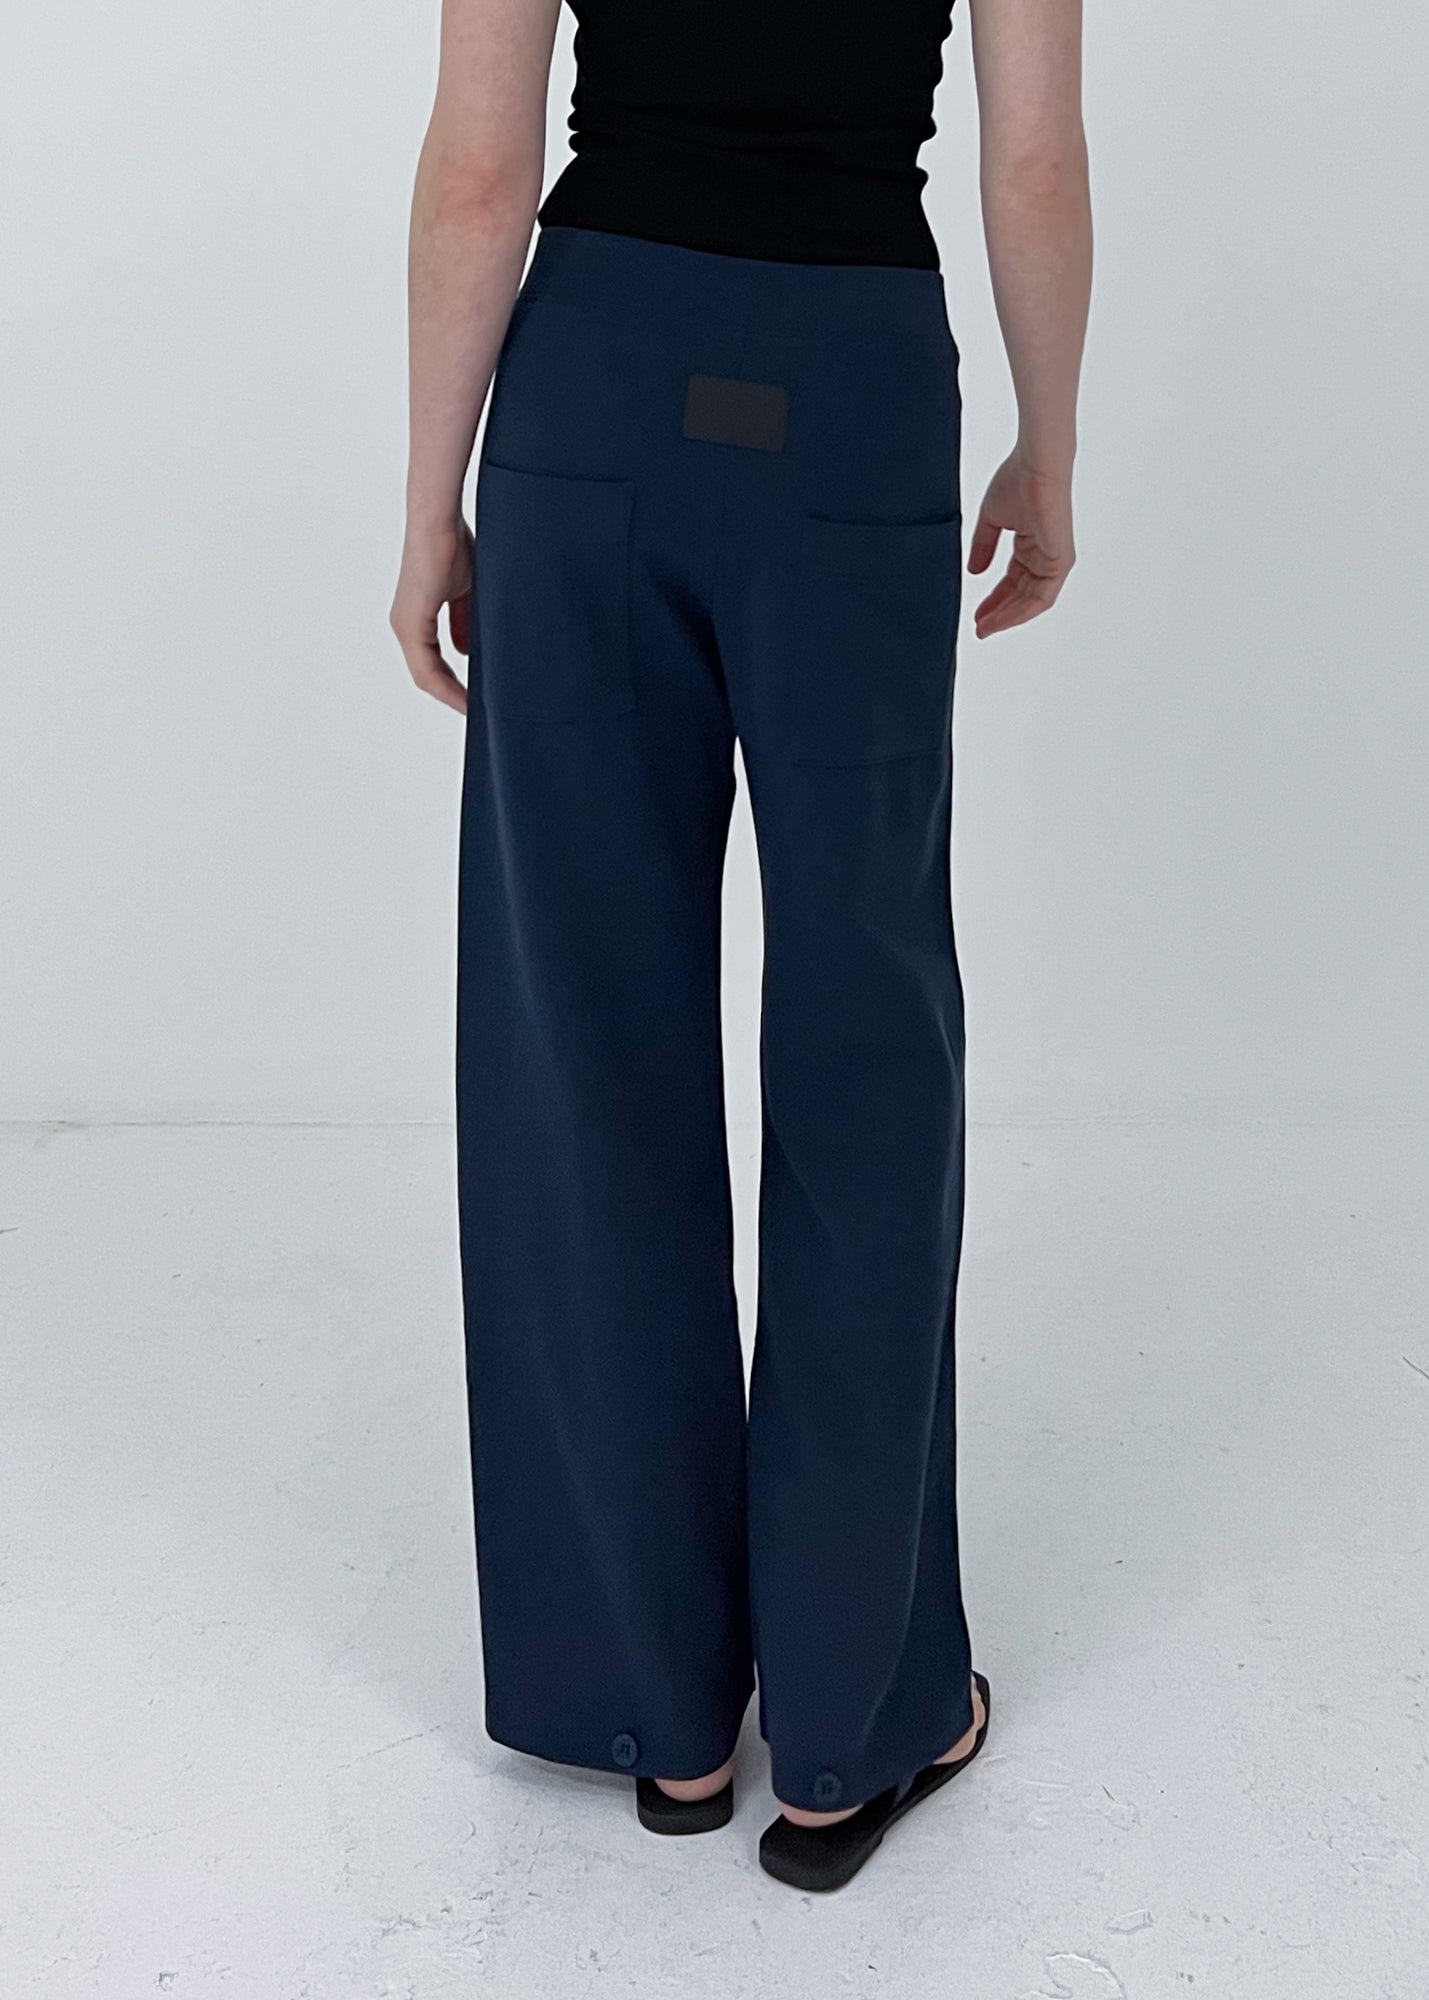 12 GALAXY SEMI-WIDE TROUSERS / STRETCH DOUBLE JERSEY - C10 ...